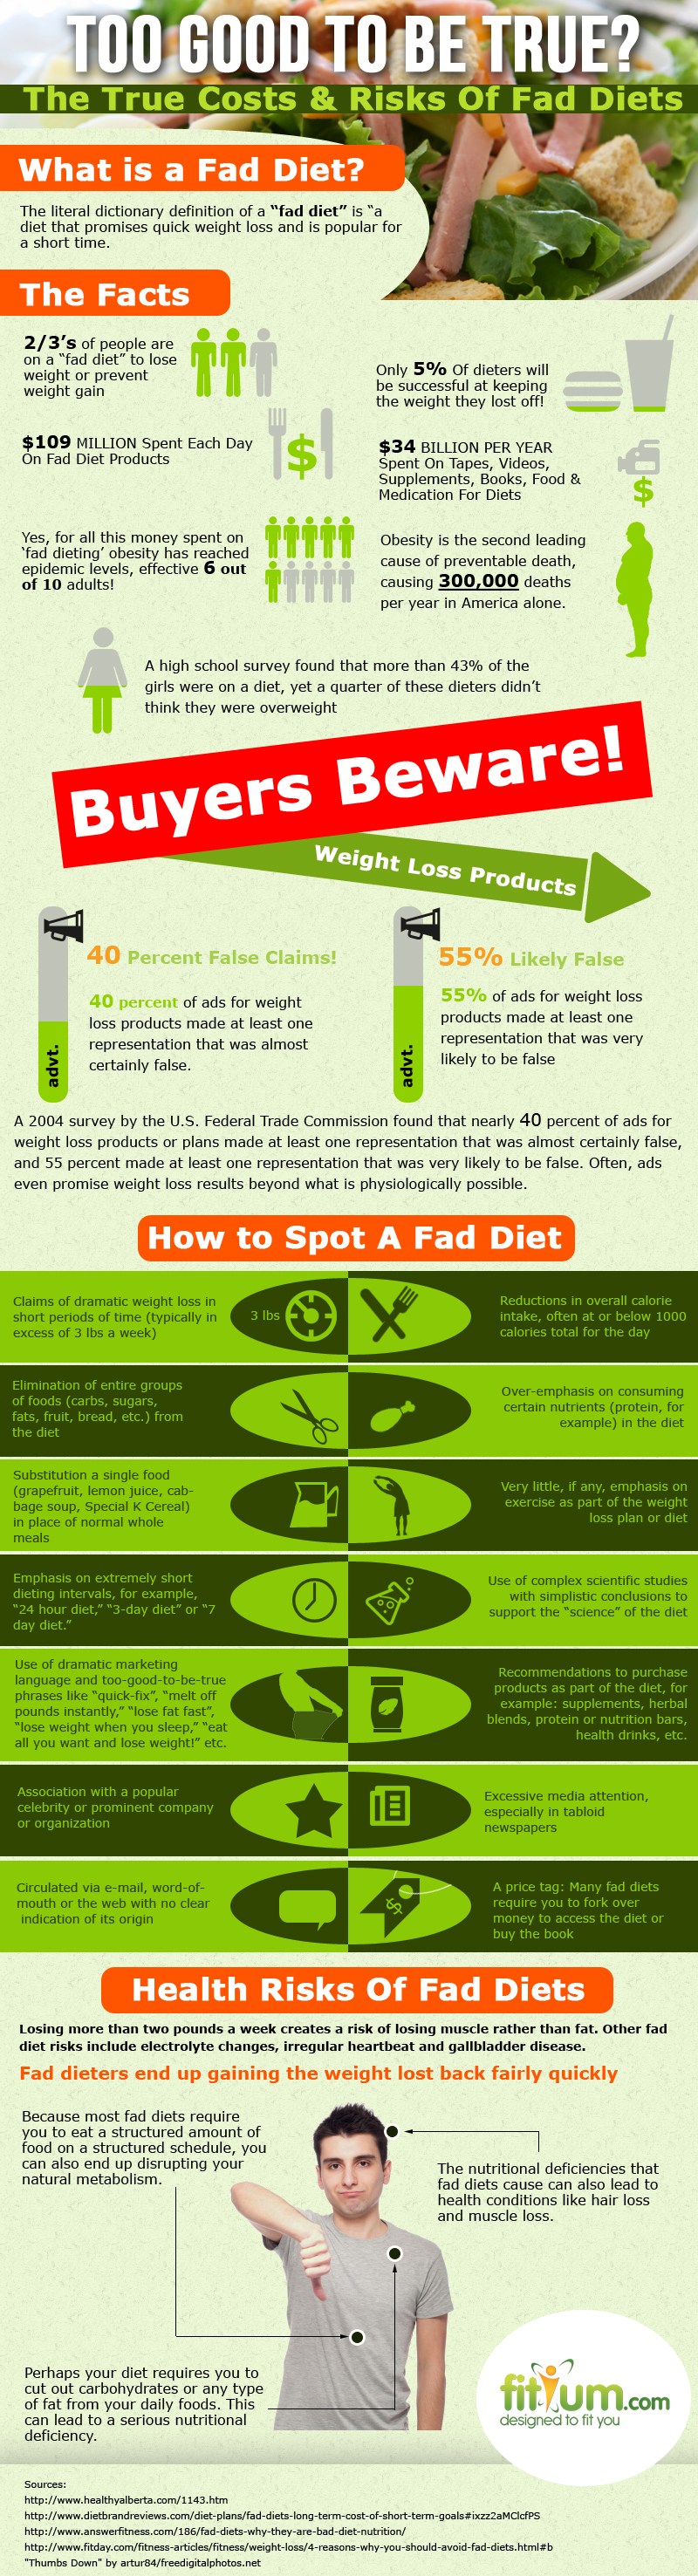 What Is the True Cost of Fad Diets?